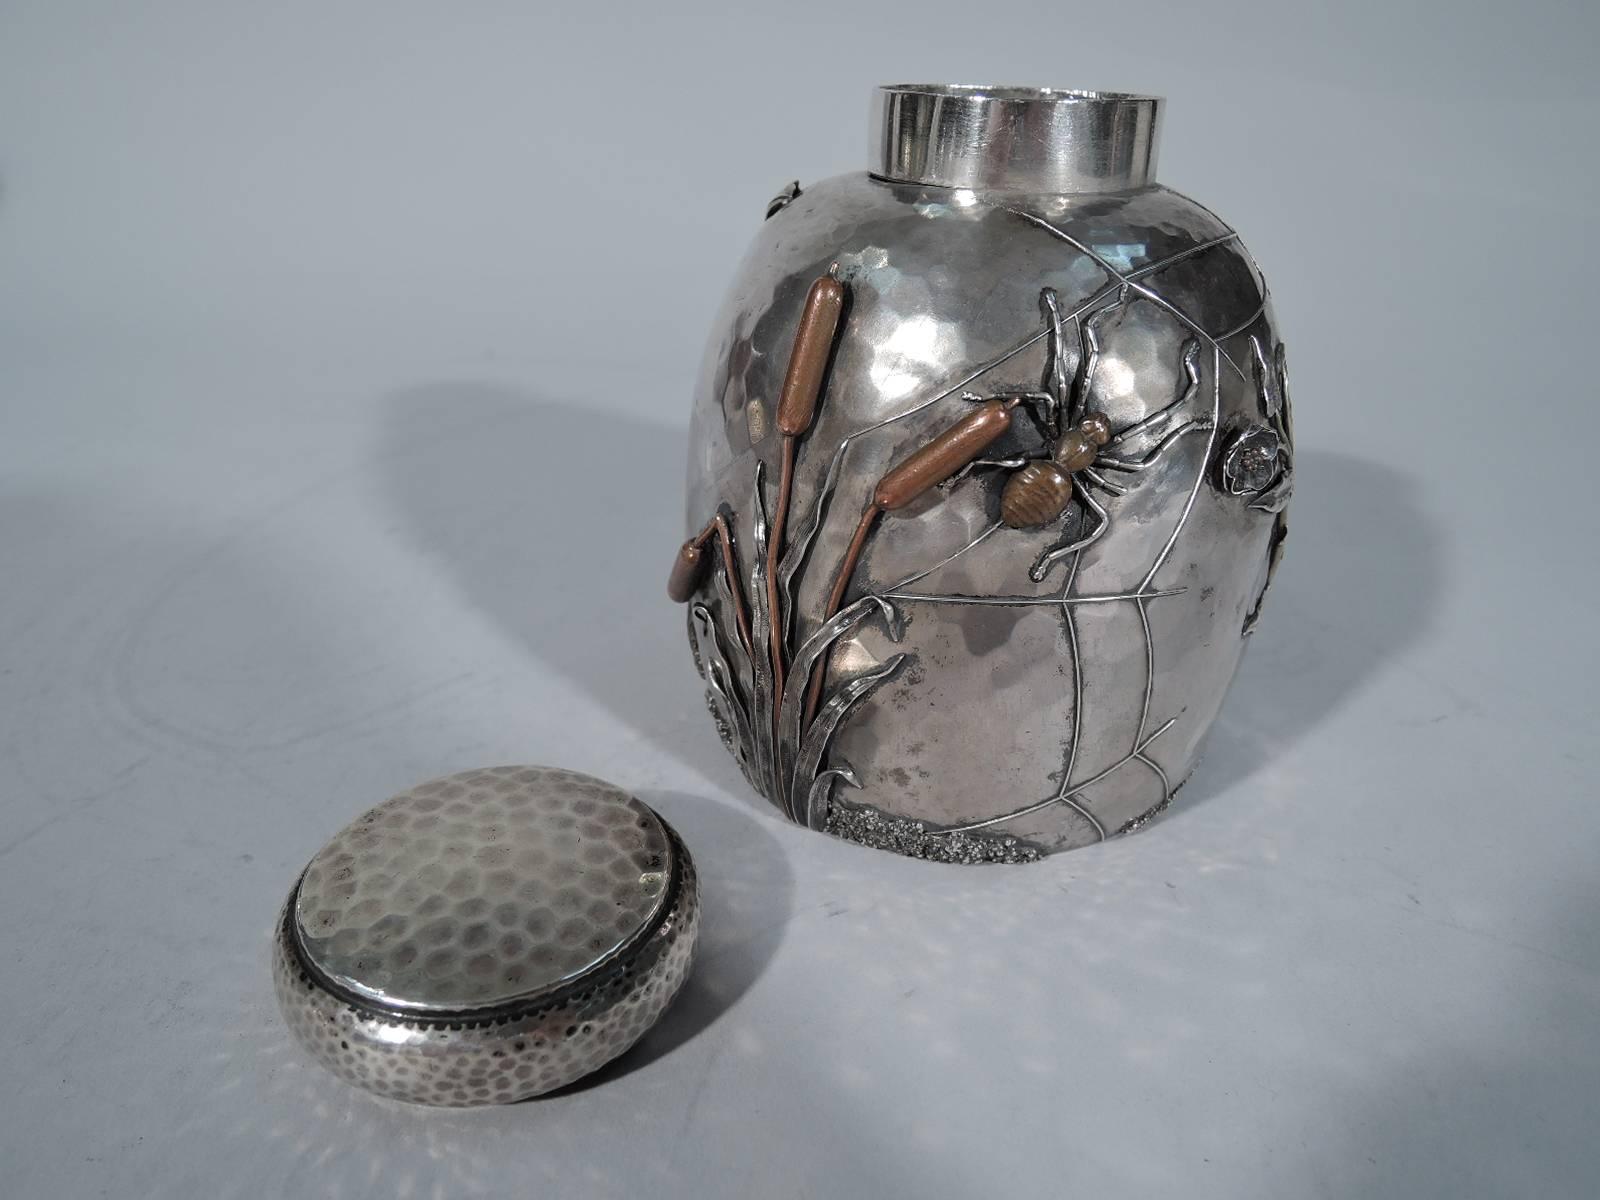 Fabulous Japonesque Sterling Silver and Mixed Metal Tea Caddy by Gorham 1